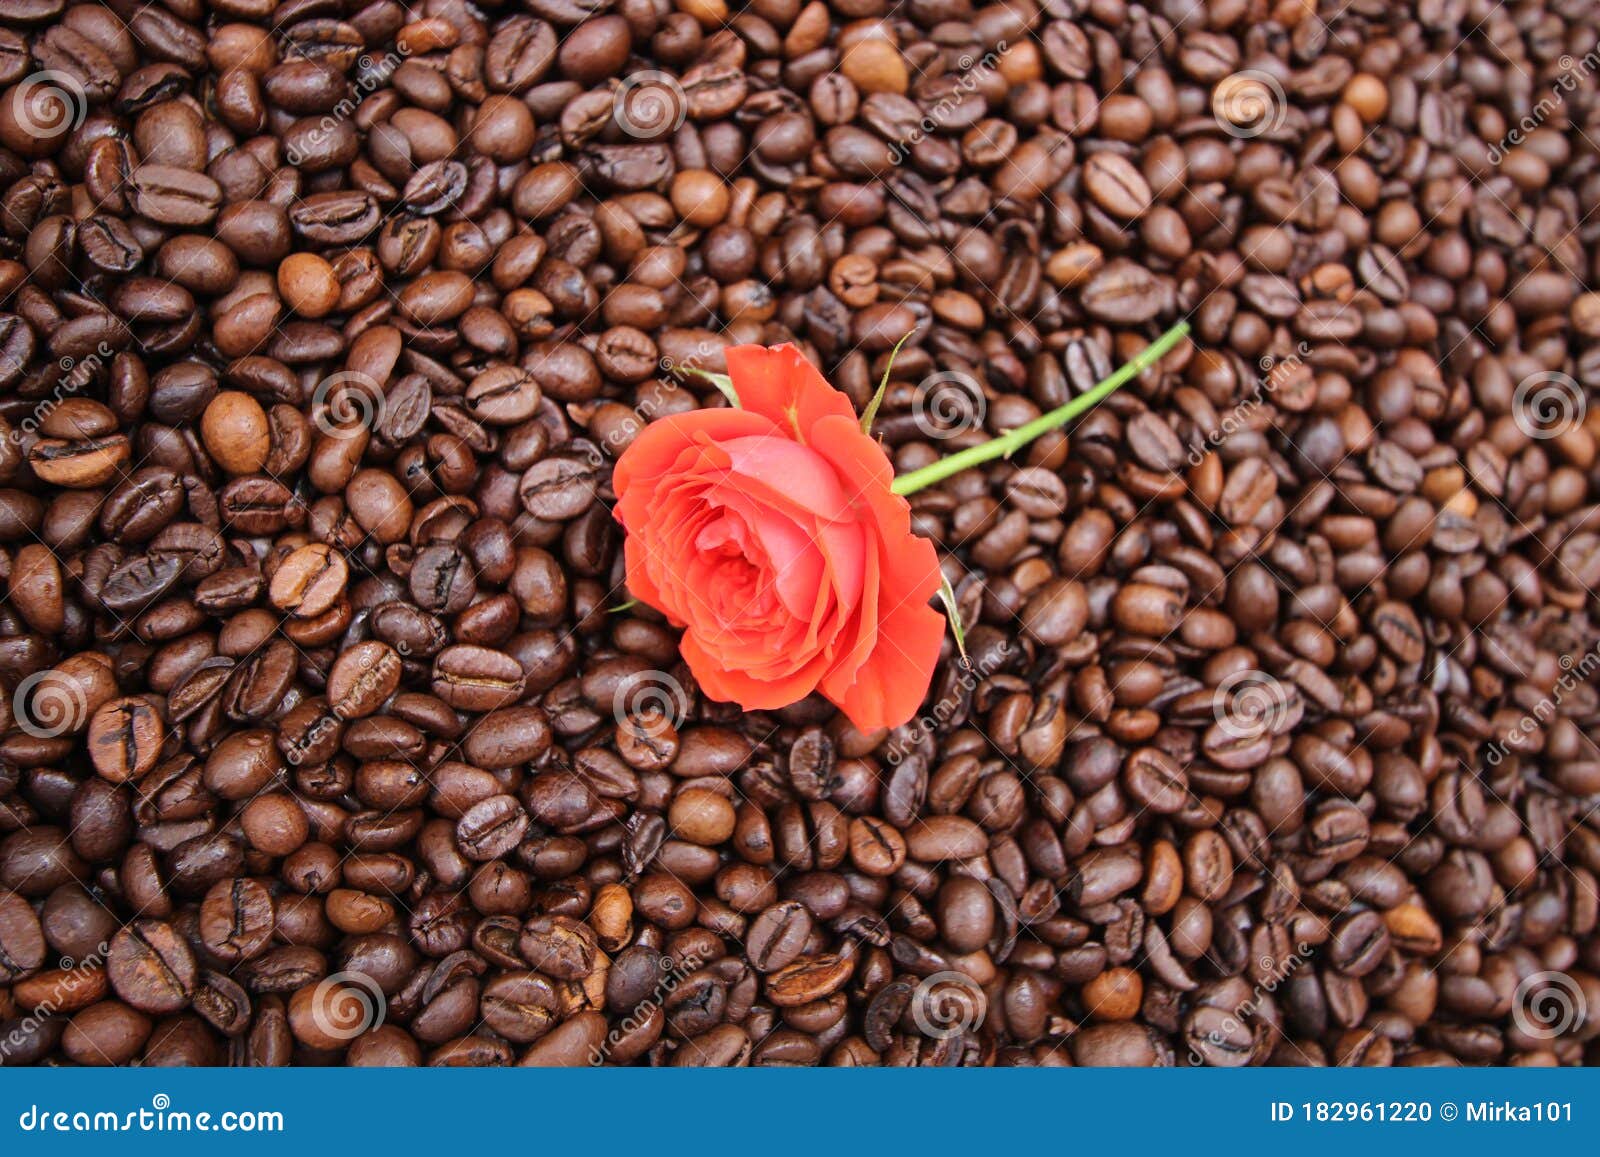 background with many coffee beans and red rose